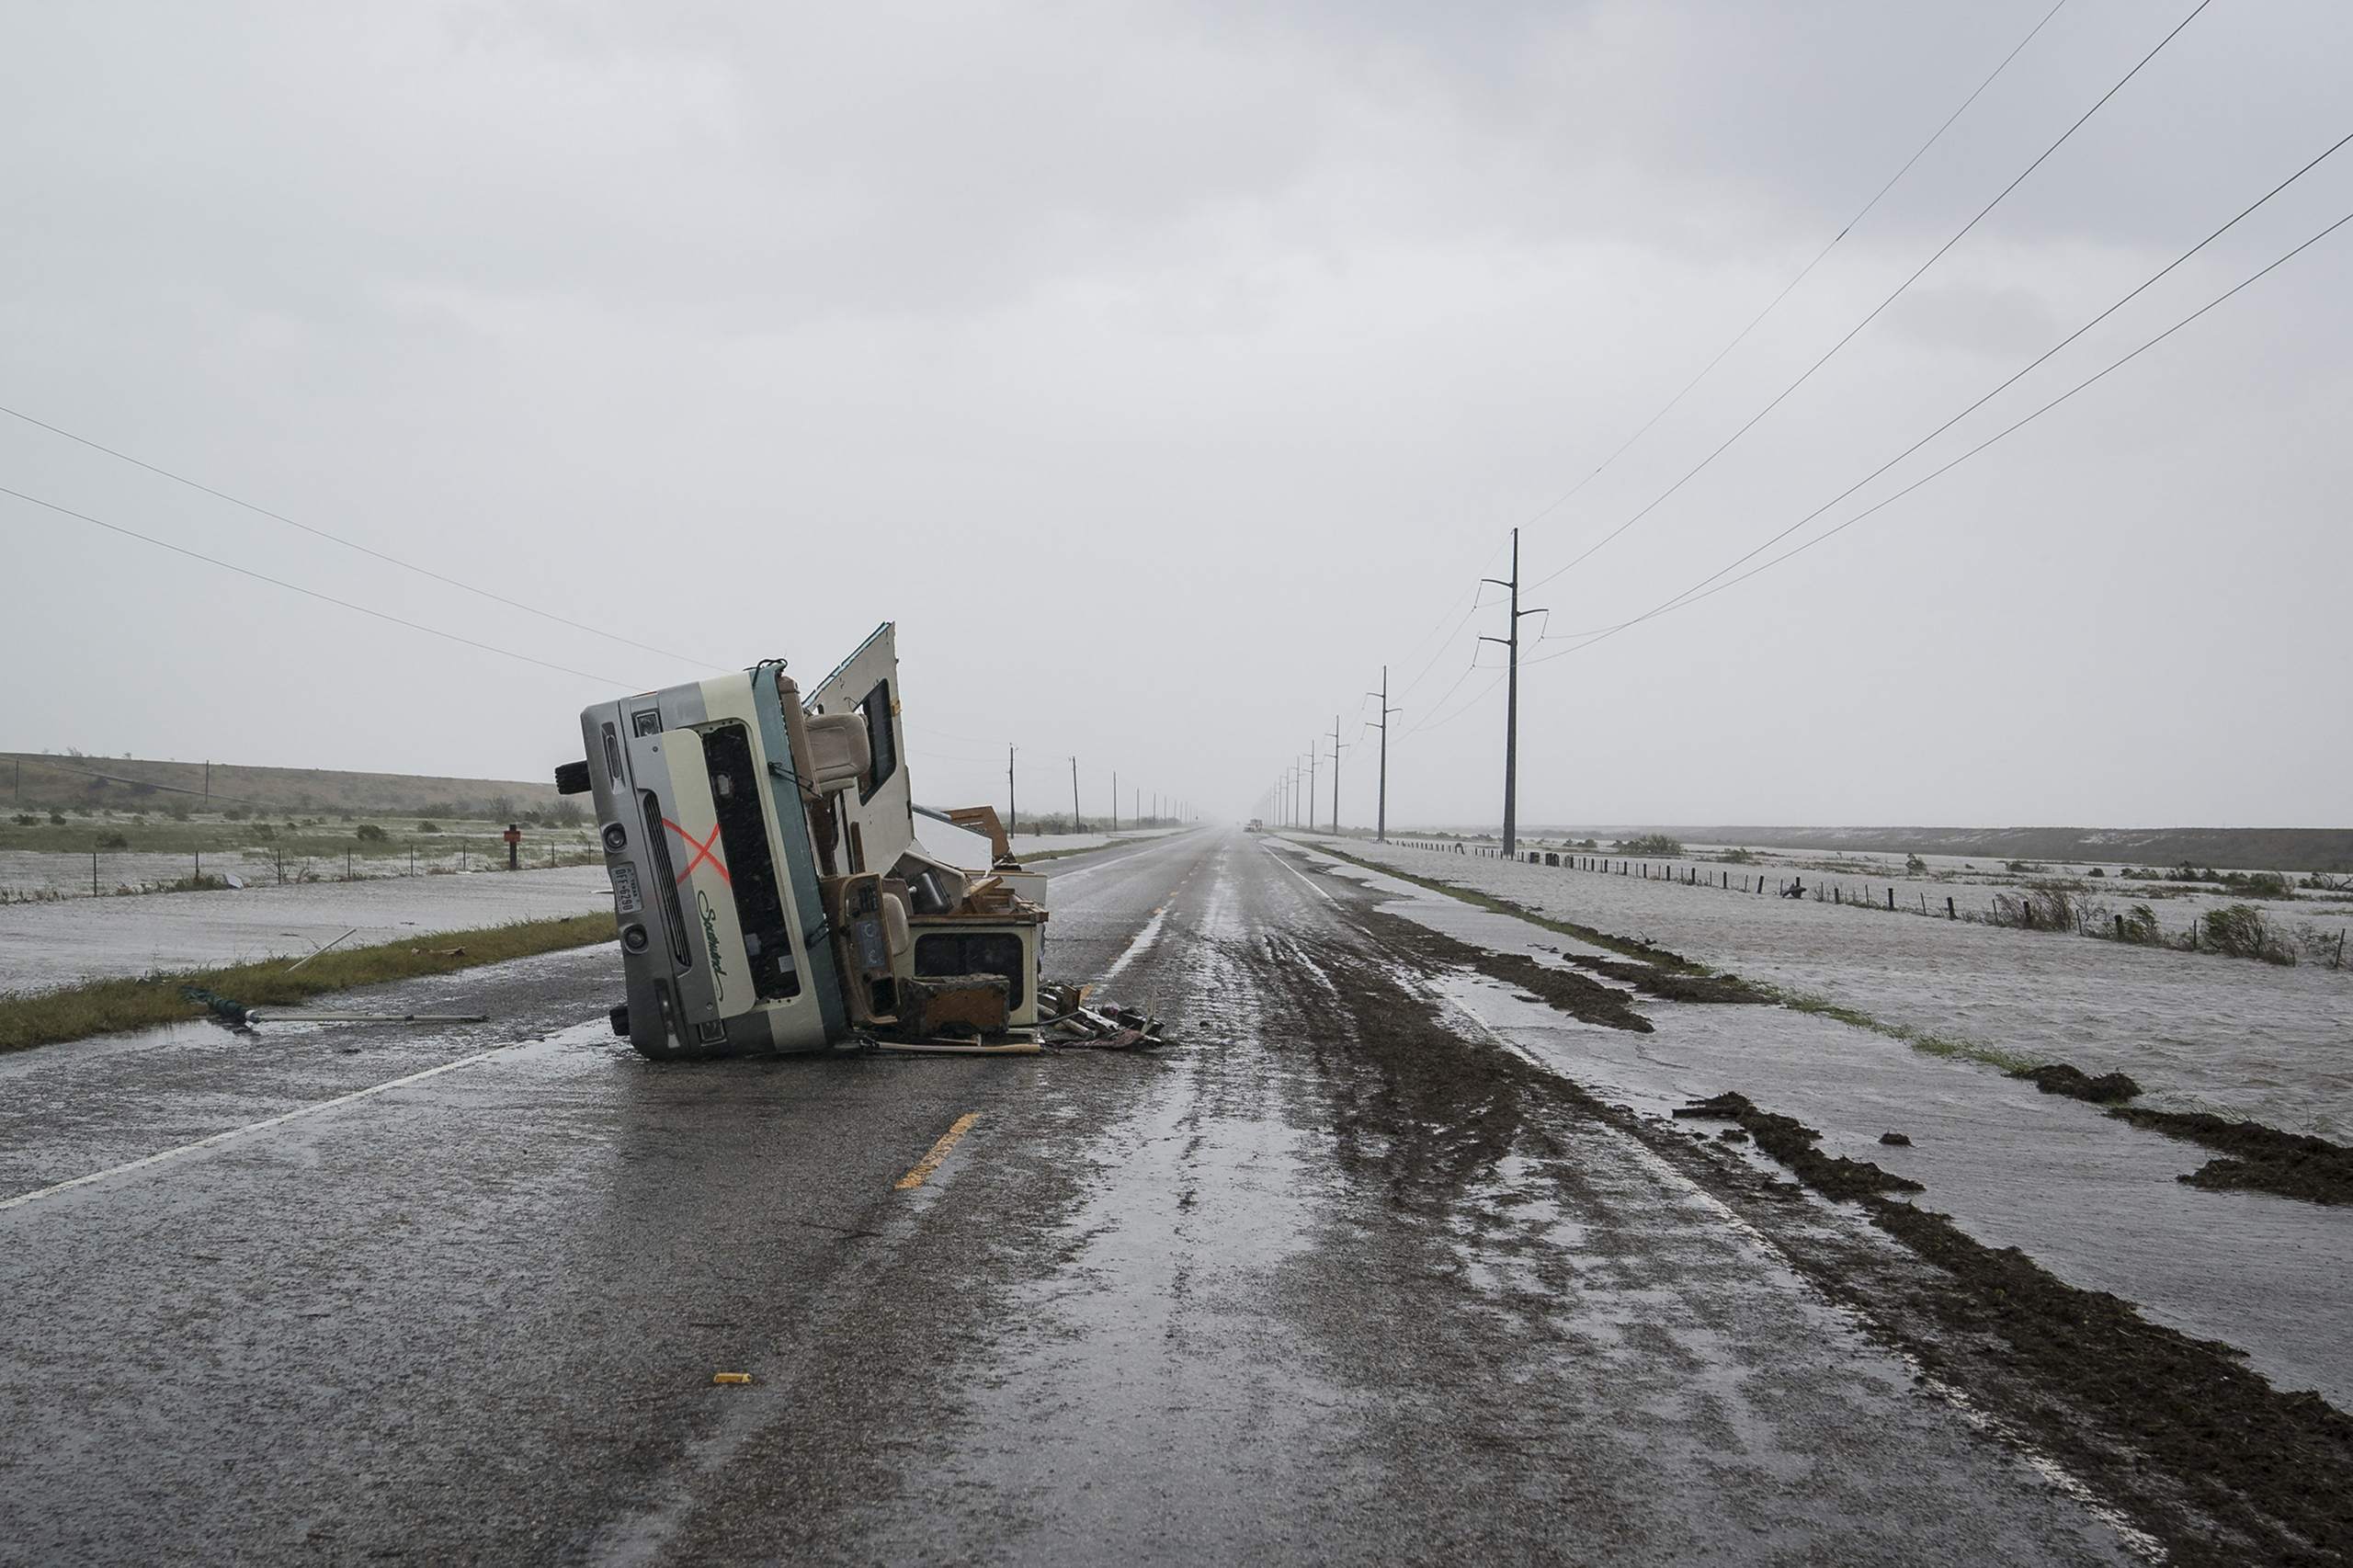 An RV is seen destroyed along the road near City-By-The Sea, TX as Hurricane Harvey hits the Texas coast on Aug 26, 2017. (Jabin Botsford—The Washington Post/Getty Images)